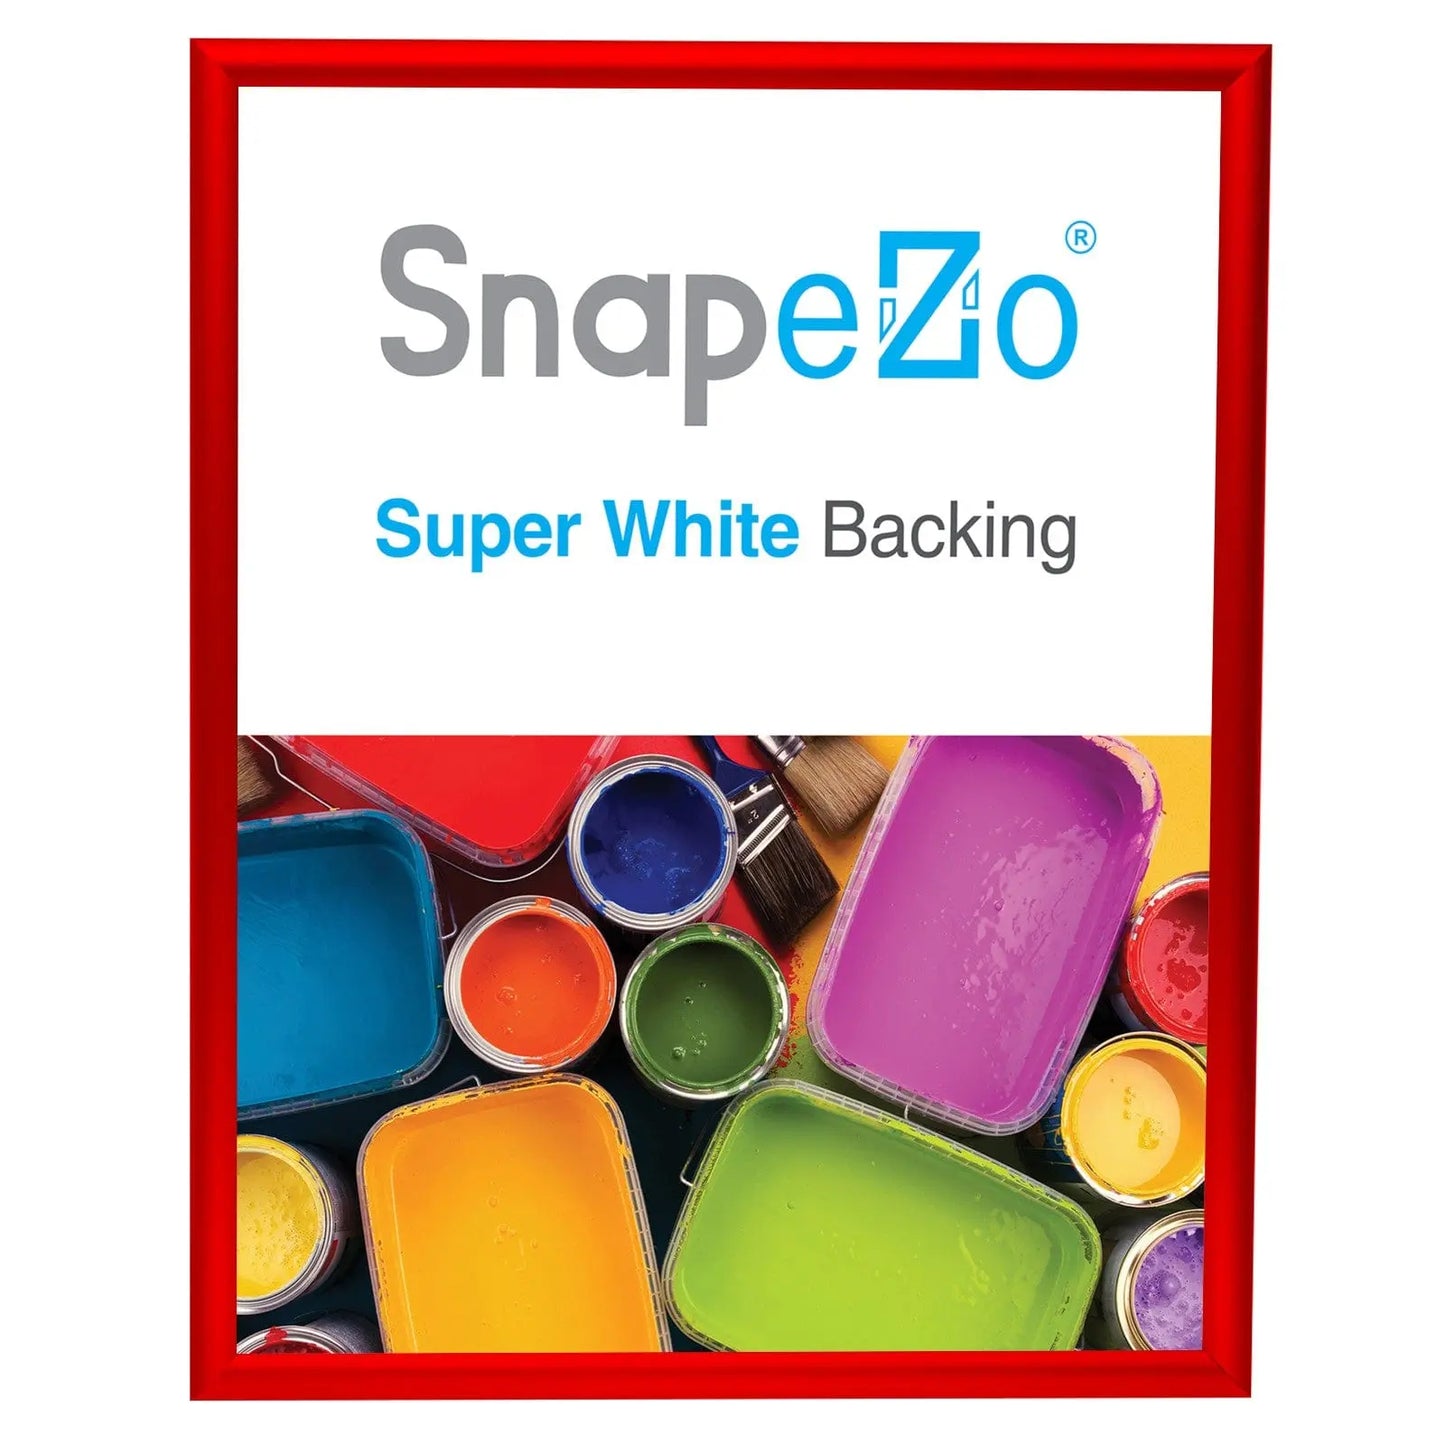 22x28 Red SnapeZo® Snap Frame - 1" Profile - Snap Frames Direct